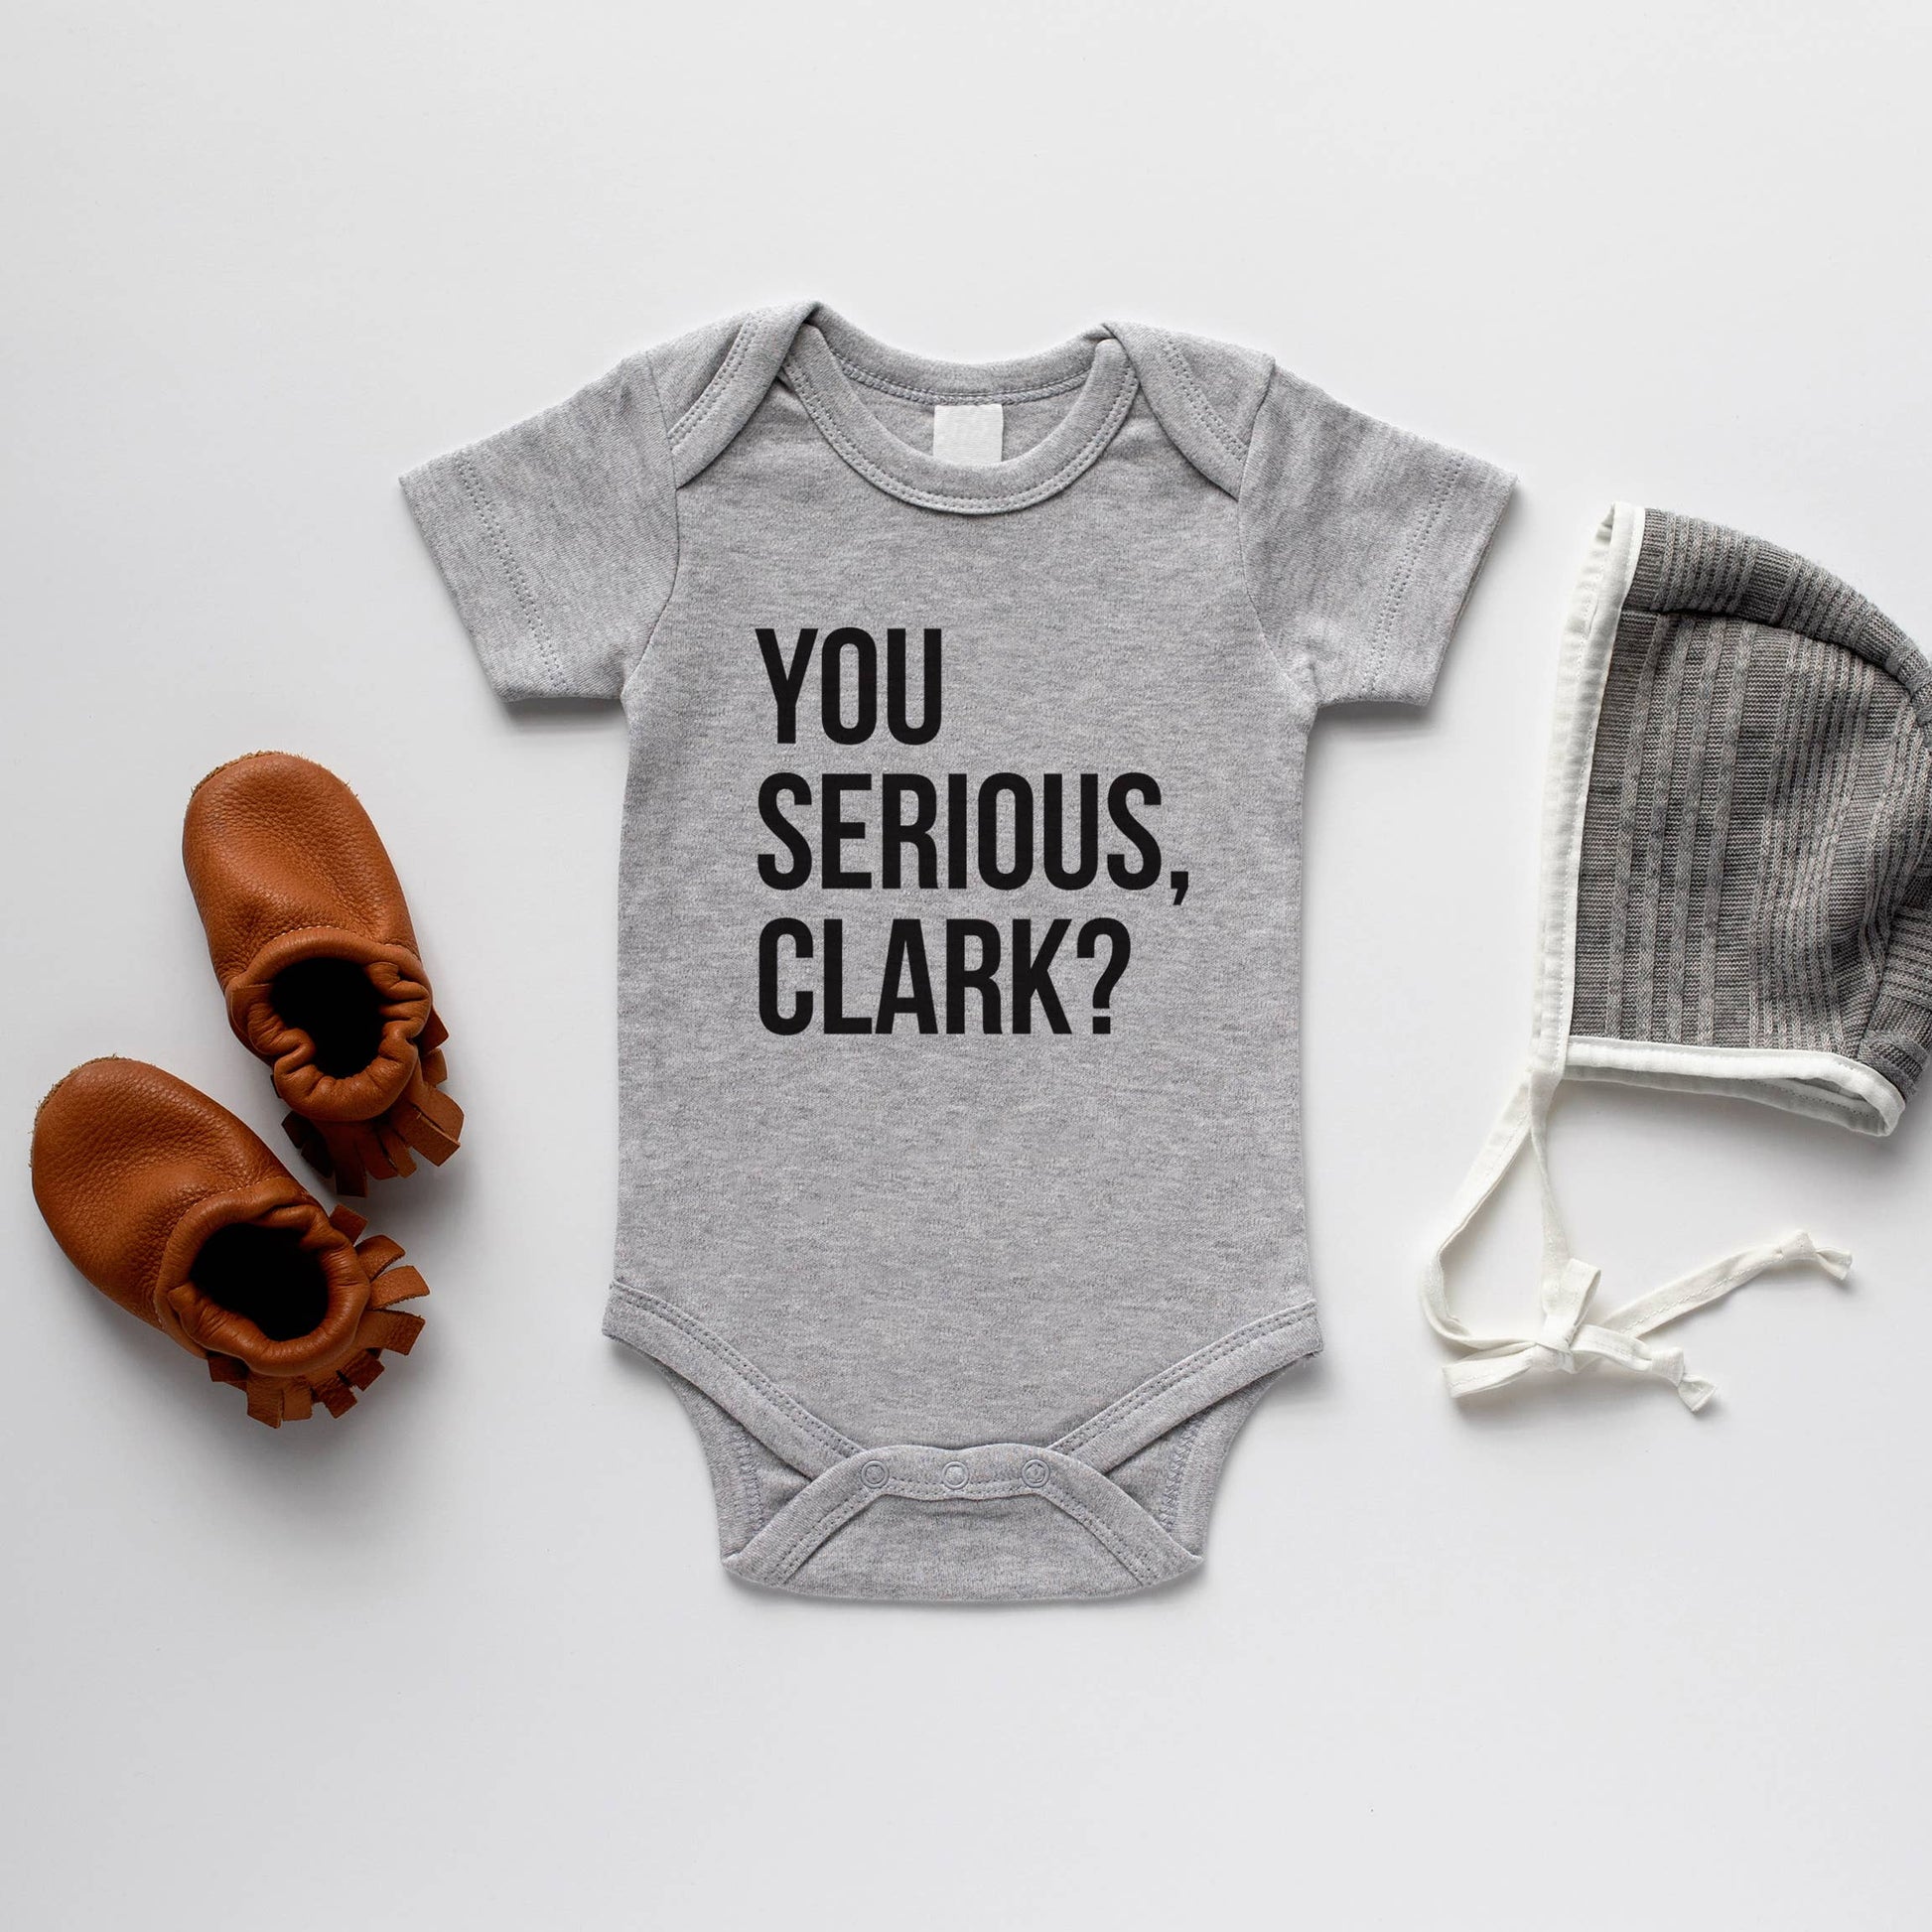 Gray You Serious Clark? Baby Bodysuit - Storm and Sky Shoppe